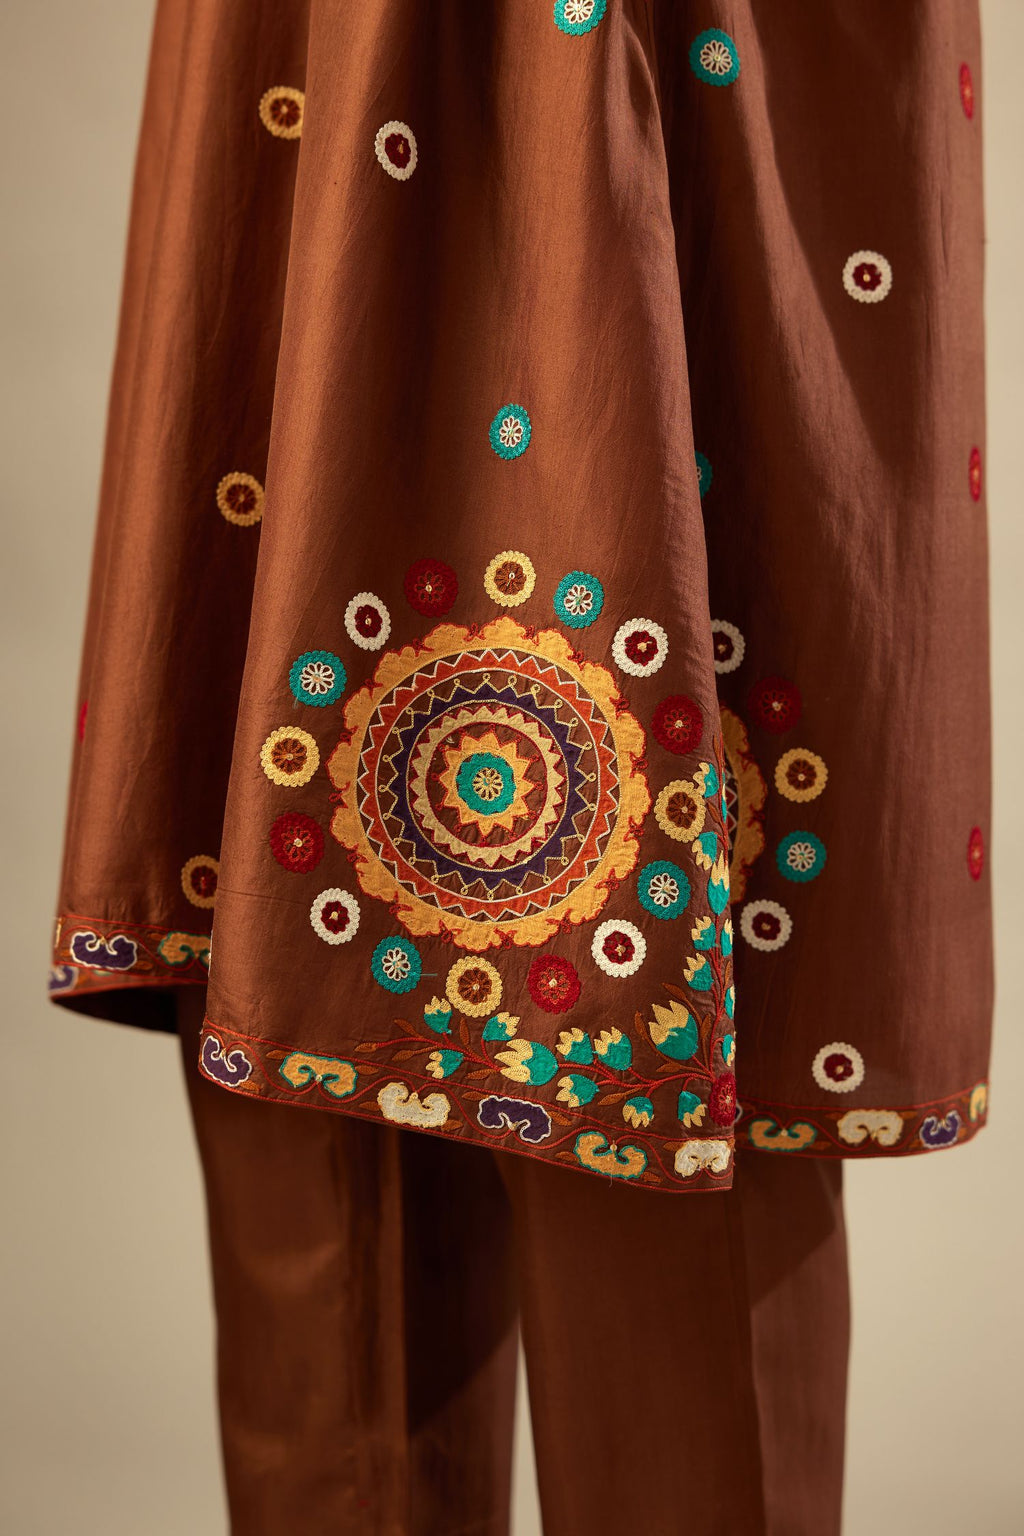 Brown silk short V-neck kurta set, with straight hem and side pockets, decorated with fine appliqué and aari thread embroidery.